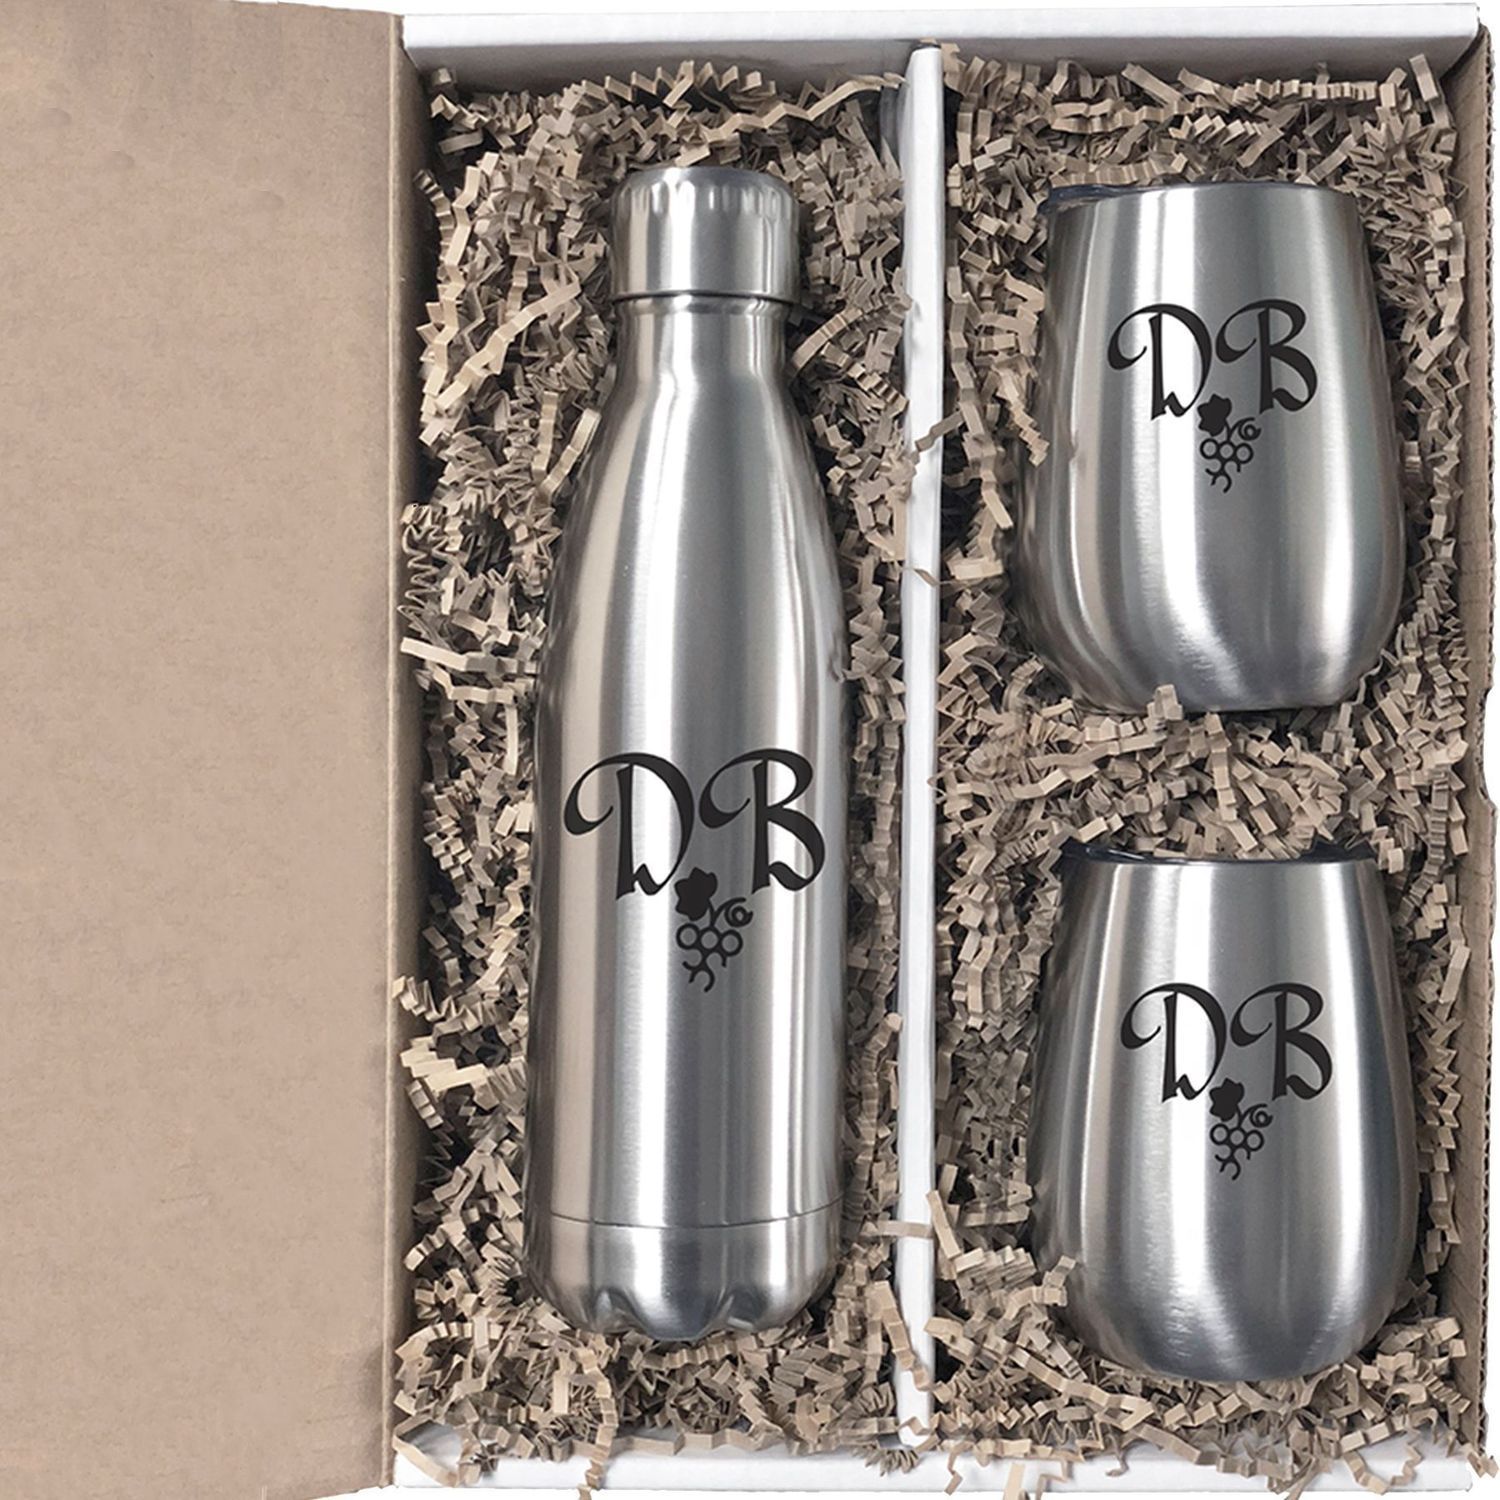 Stainless Steel Pop Bottle and Wine Glasses Gift Set